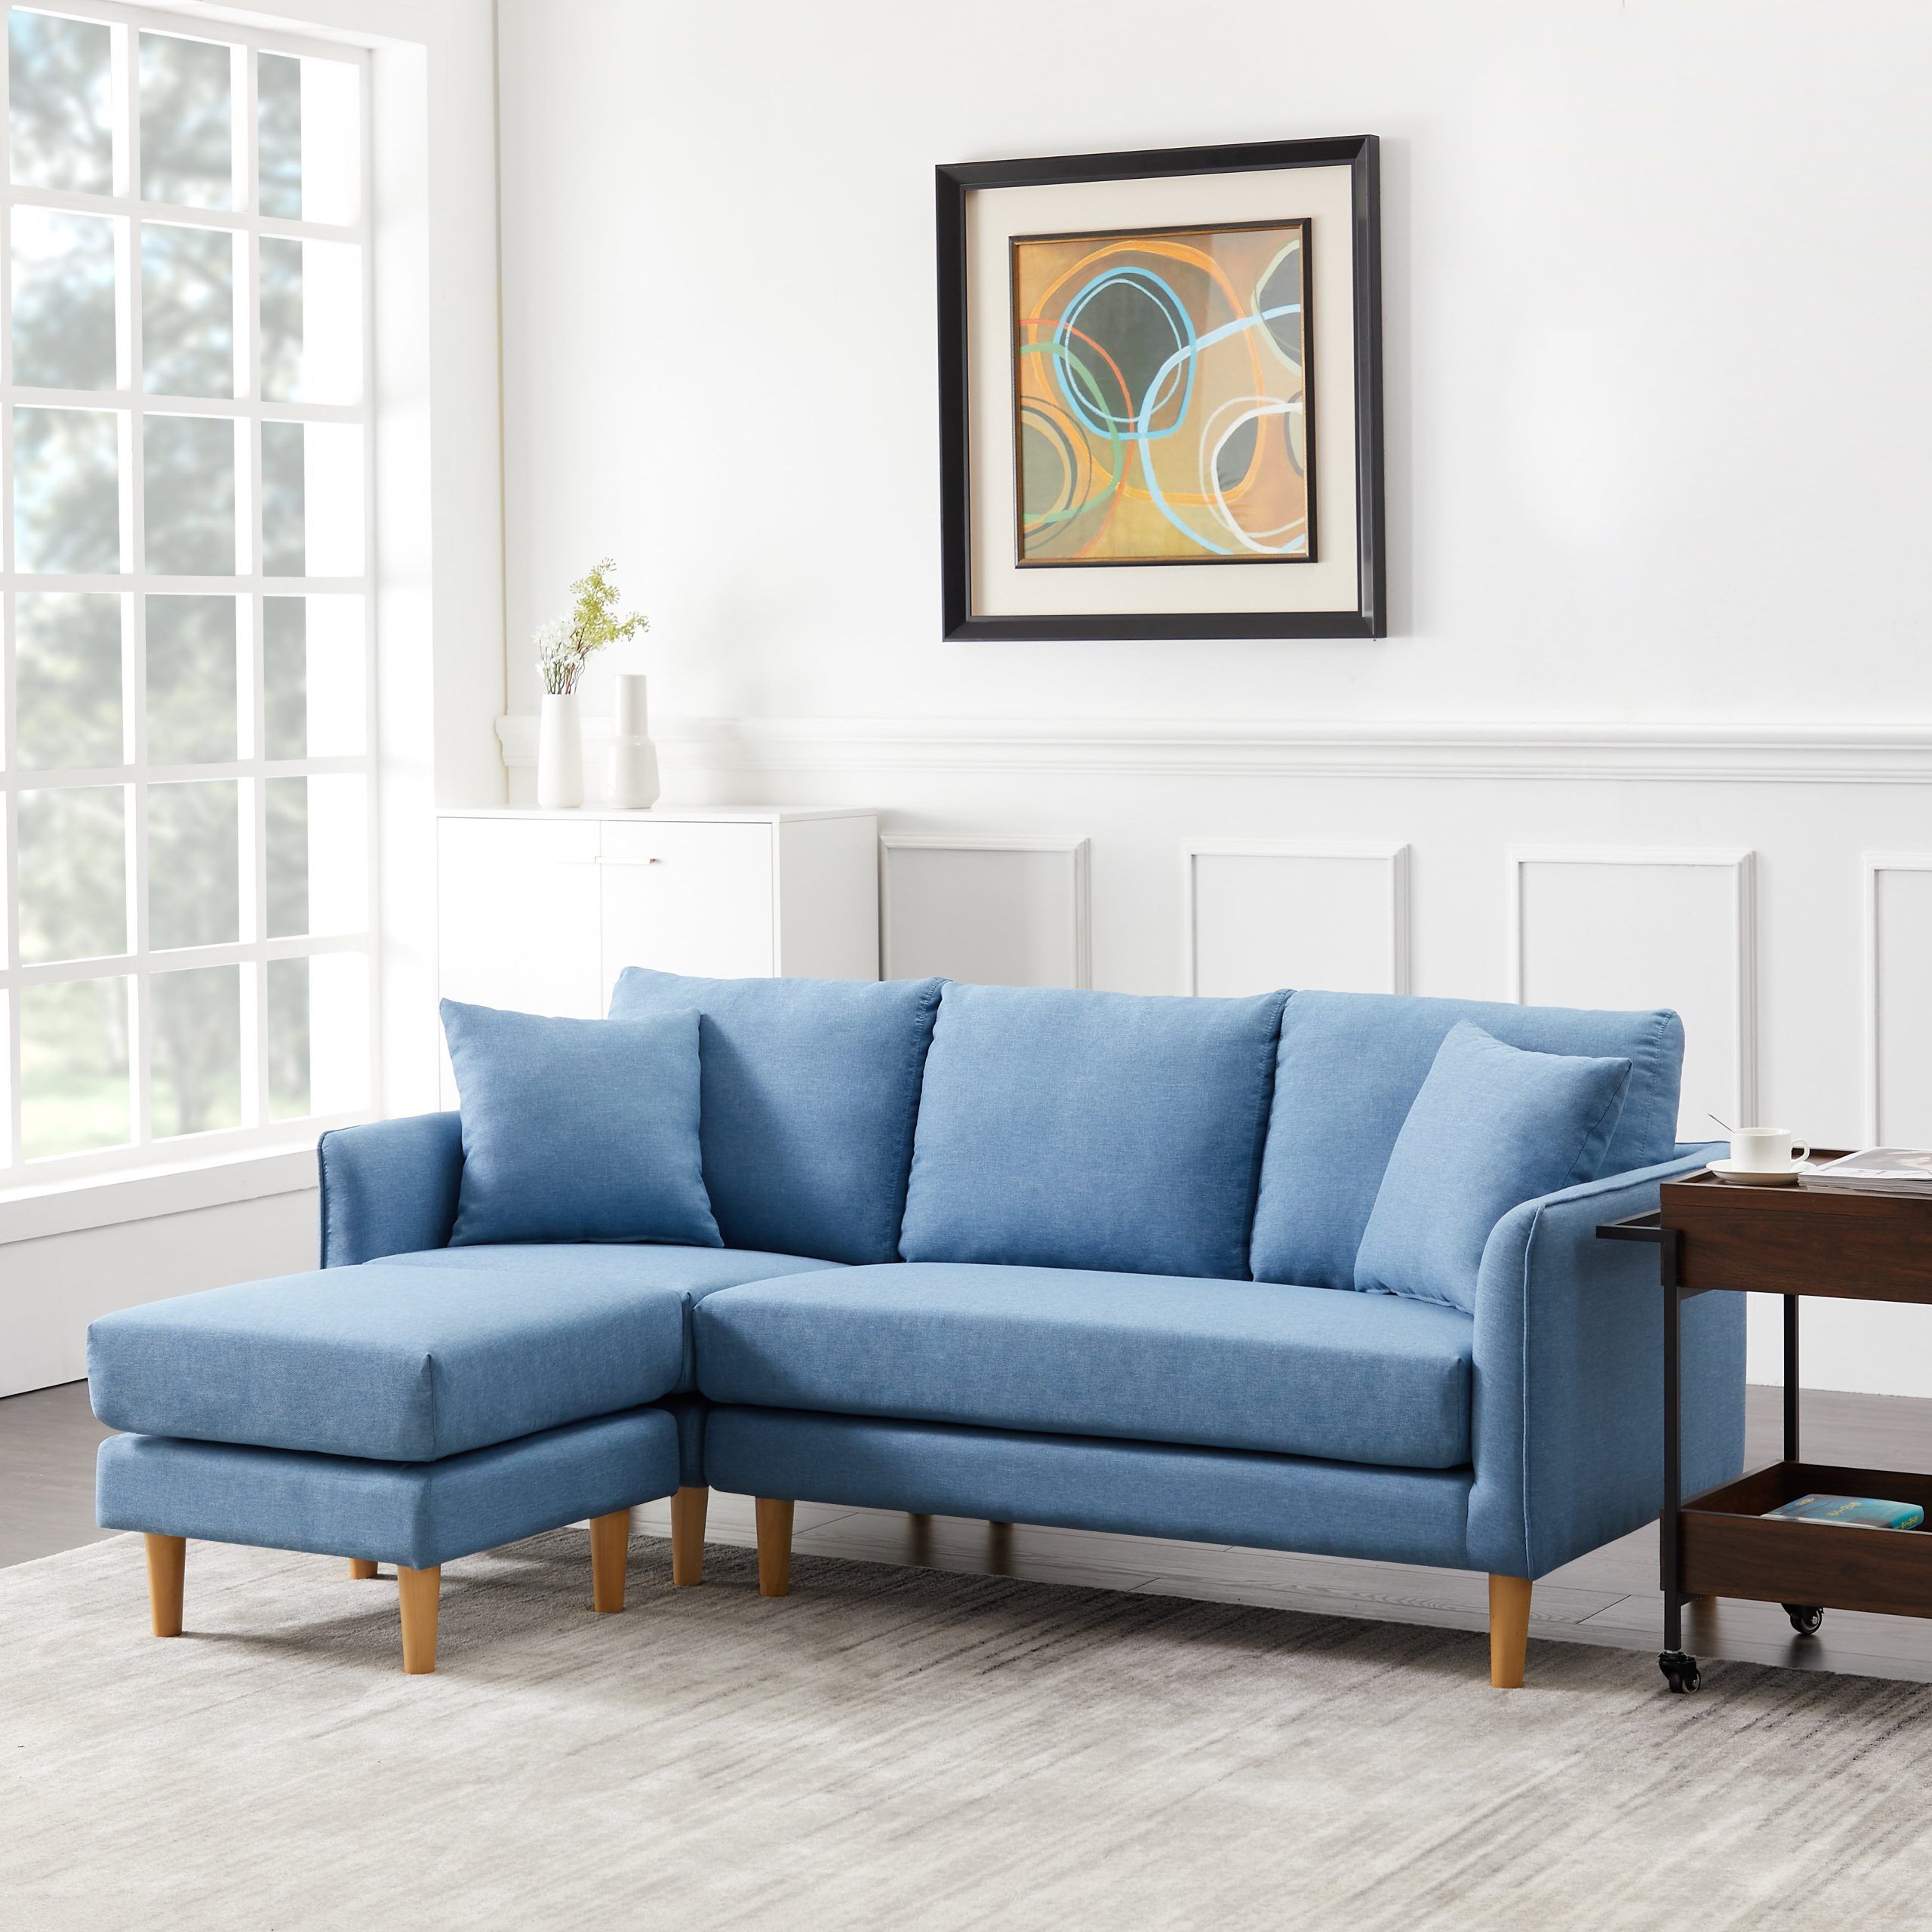 Uhomepro Convertible Sectional Sofa Couch, 74"w L Shaped Couch With Within Sofas For Small Spaces (Gallery 15 of 20)